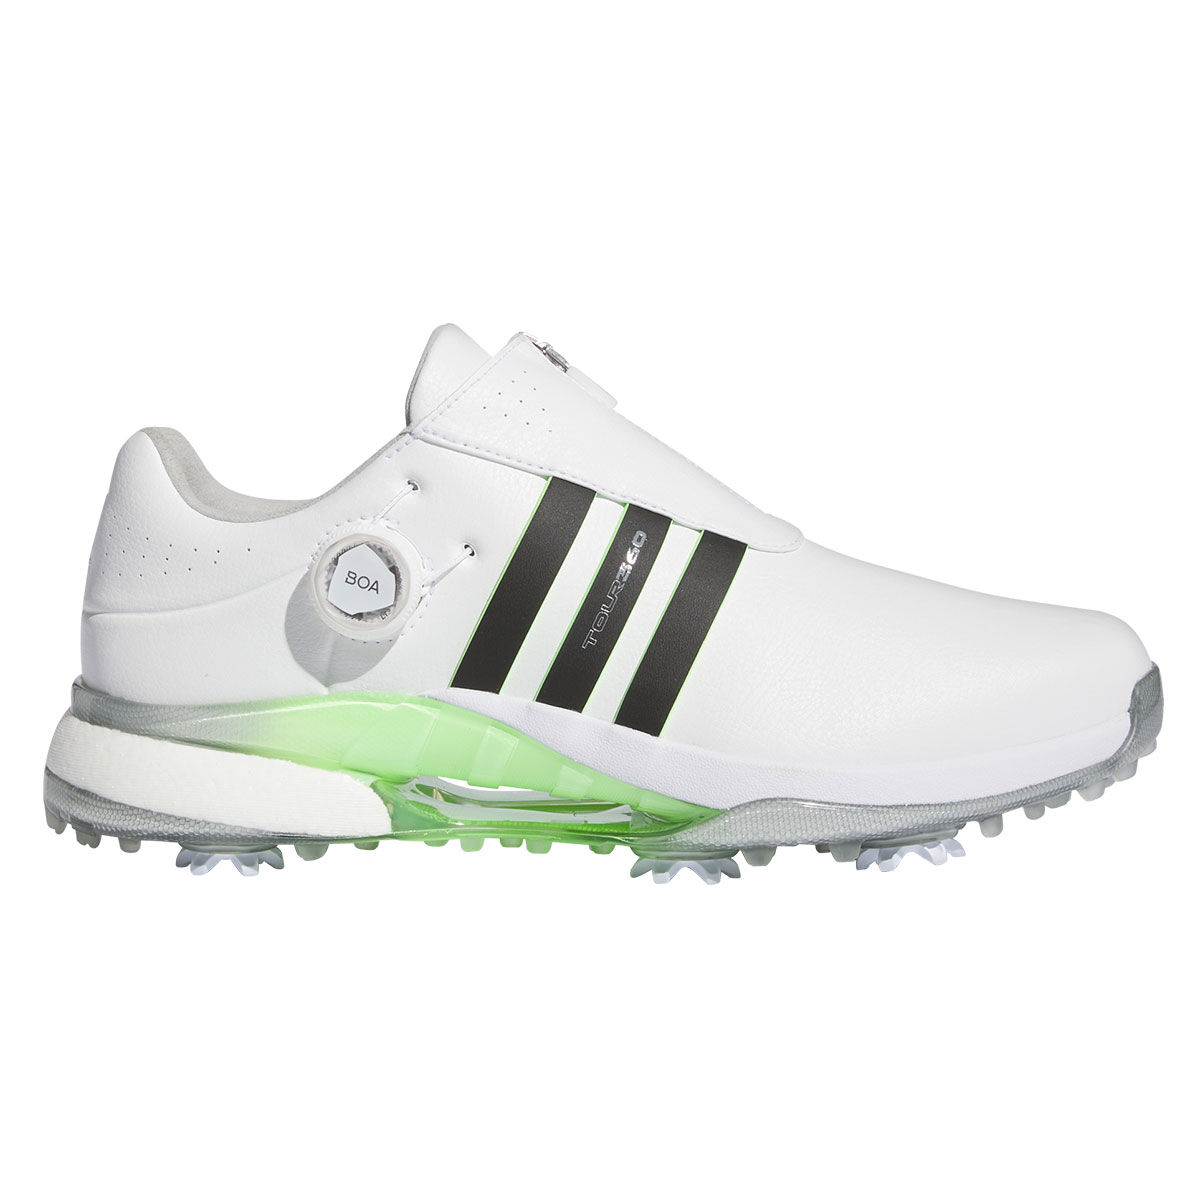 adidas Men’s Tour360 24 BOA Boost Waterproof Spiked Golf Shoes, Mens, White/core black/green spark, 9 | American Golf